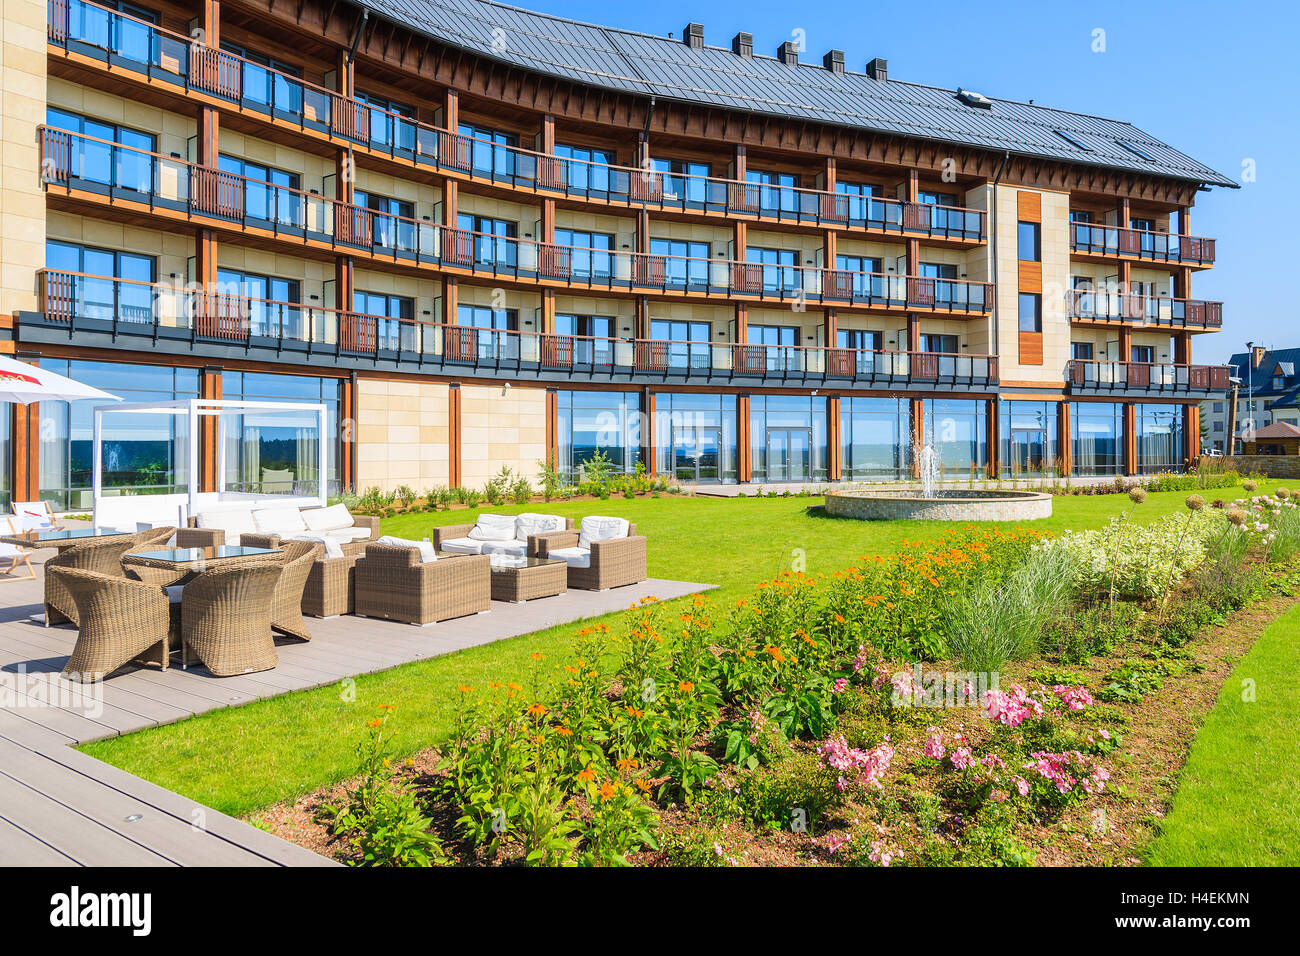 ARLAMOW HOTEL, POLAND - AUG 3, 2014: green garden in Arlamow Hotel. This luxury resort was owned by Poland's government and is located in Bieszczady Mountains. Stock Photo